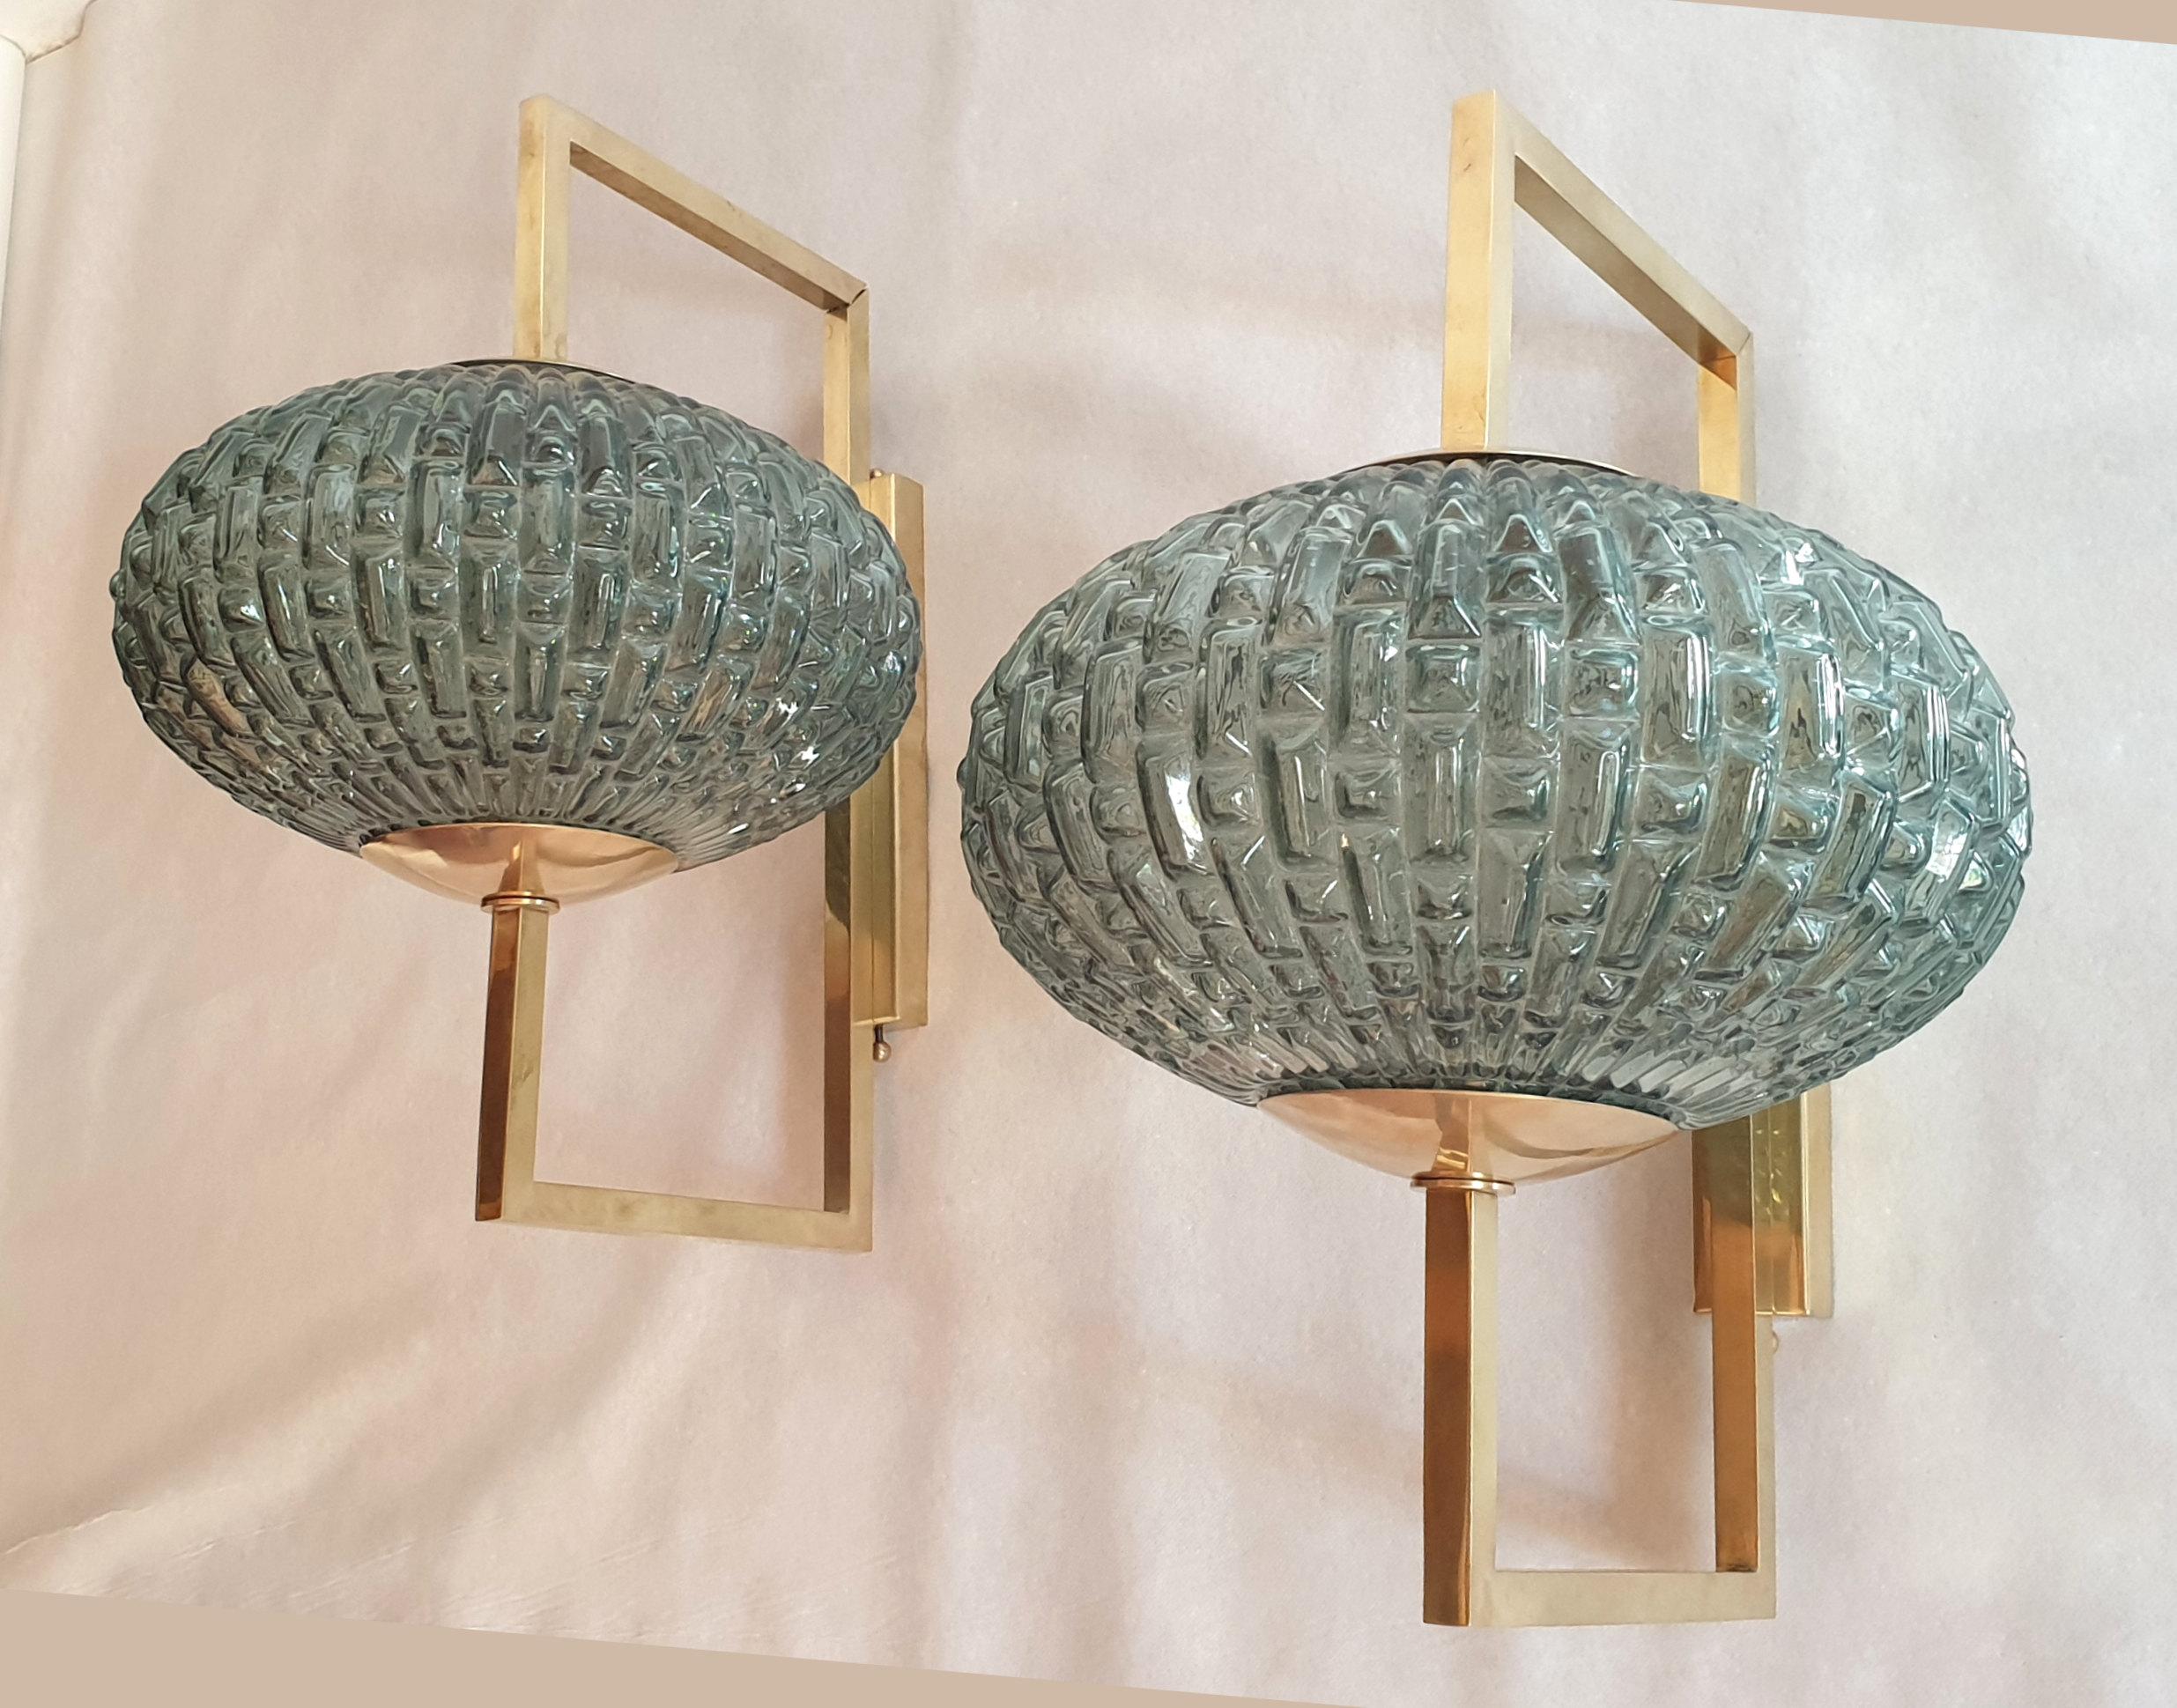 Pair of unusual blue/green Murano glass and brass Mid-Century Modern wall sconces.
One light each, rewired with medium base light bulb.
The brass mounts are sliding up, to ease the light bulb change.
They are in excellent condition.
One glass is